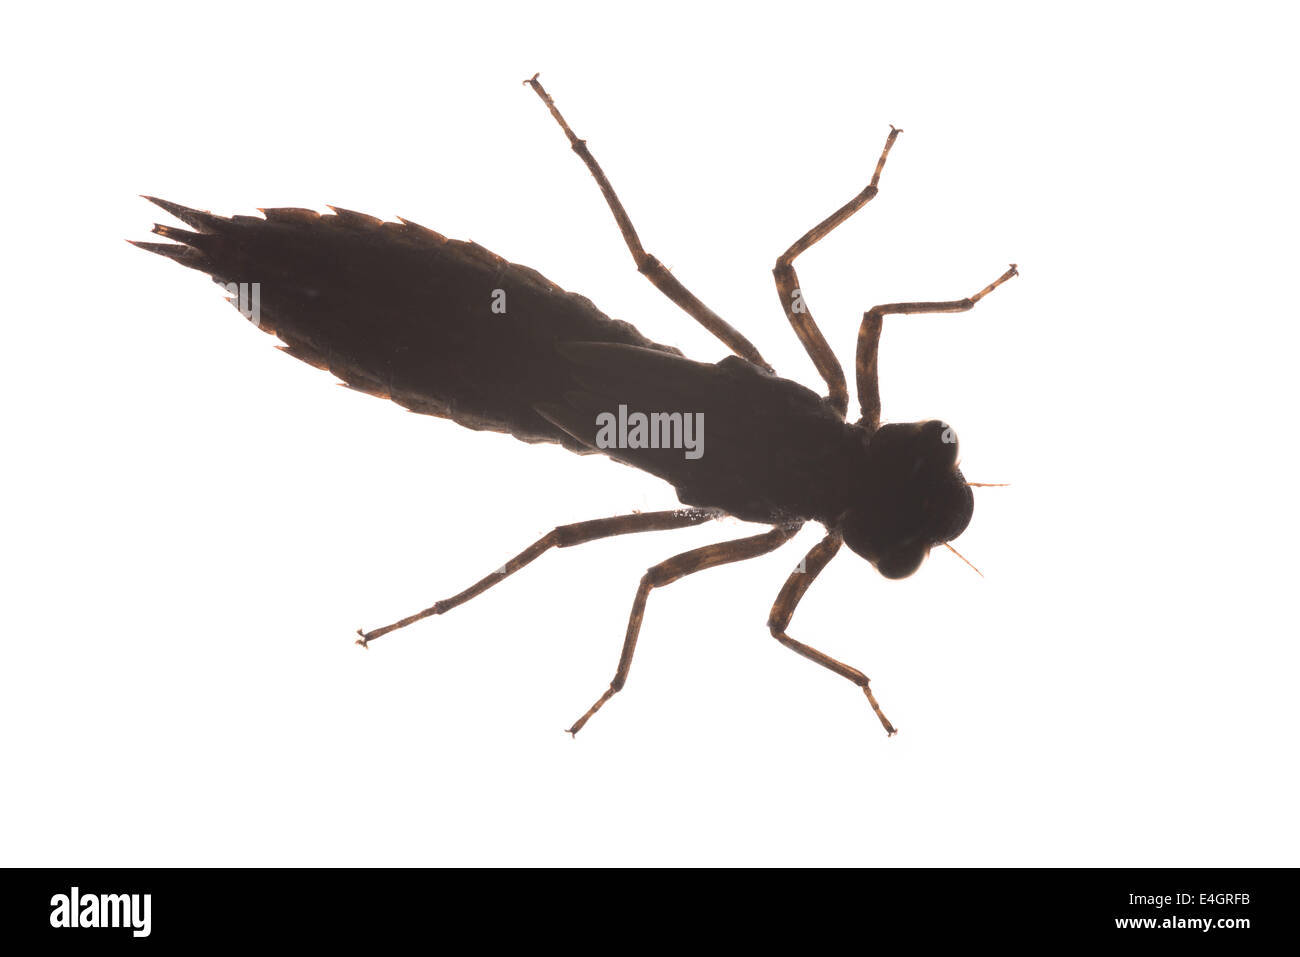 Scary and afraid phobia of insects dragonfly larvae outline silhouette of mature nymph Stock Photo